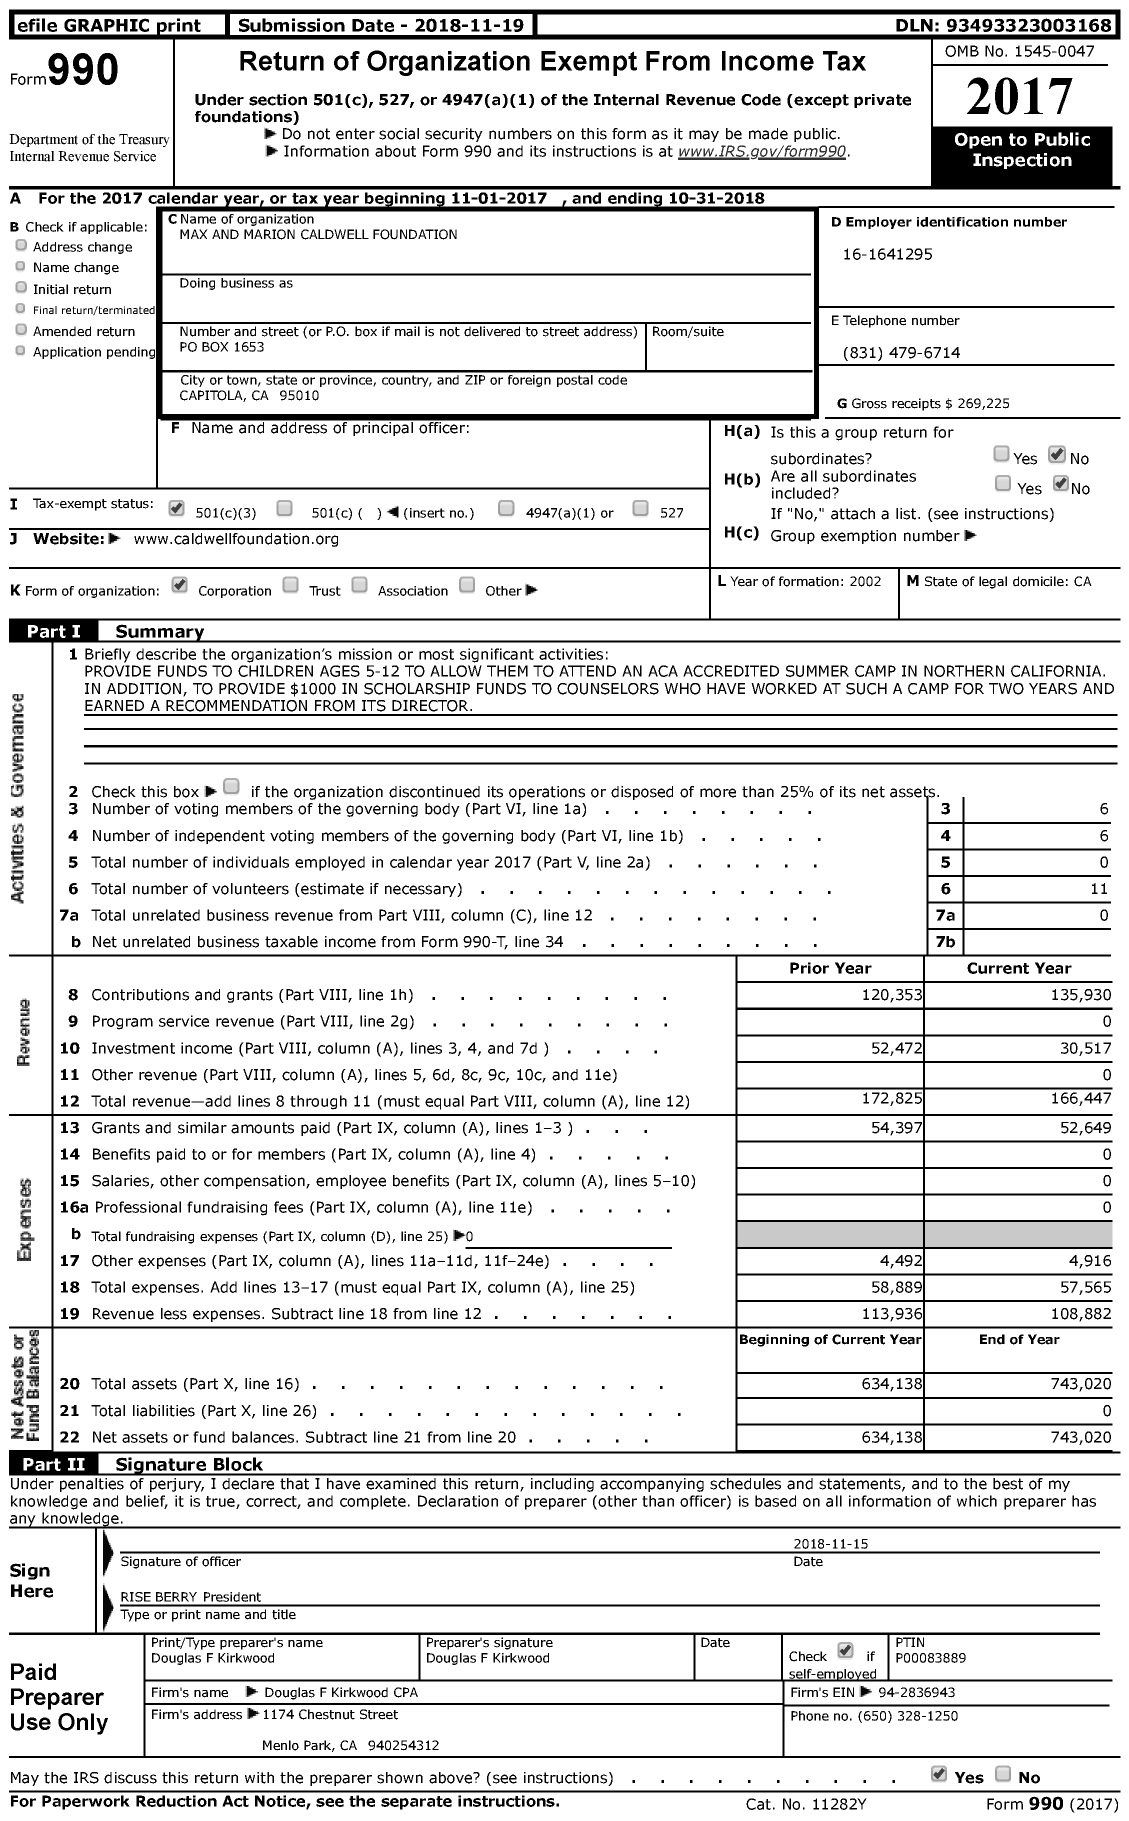 Image of first page of 2017 Form 990 for Max and Marion Caldwell Foundation